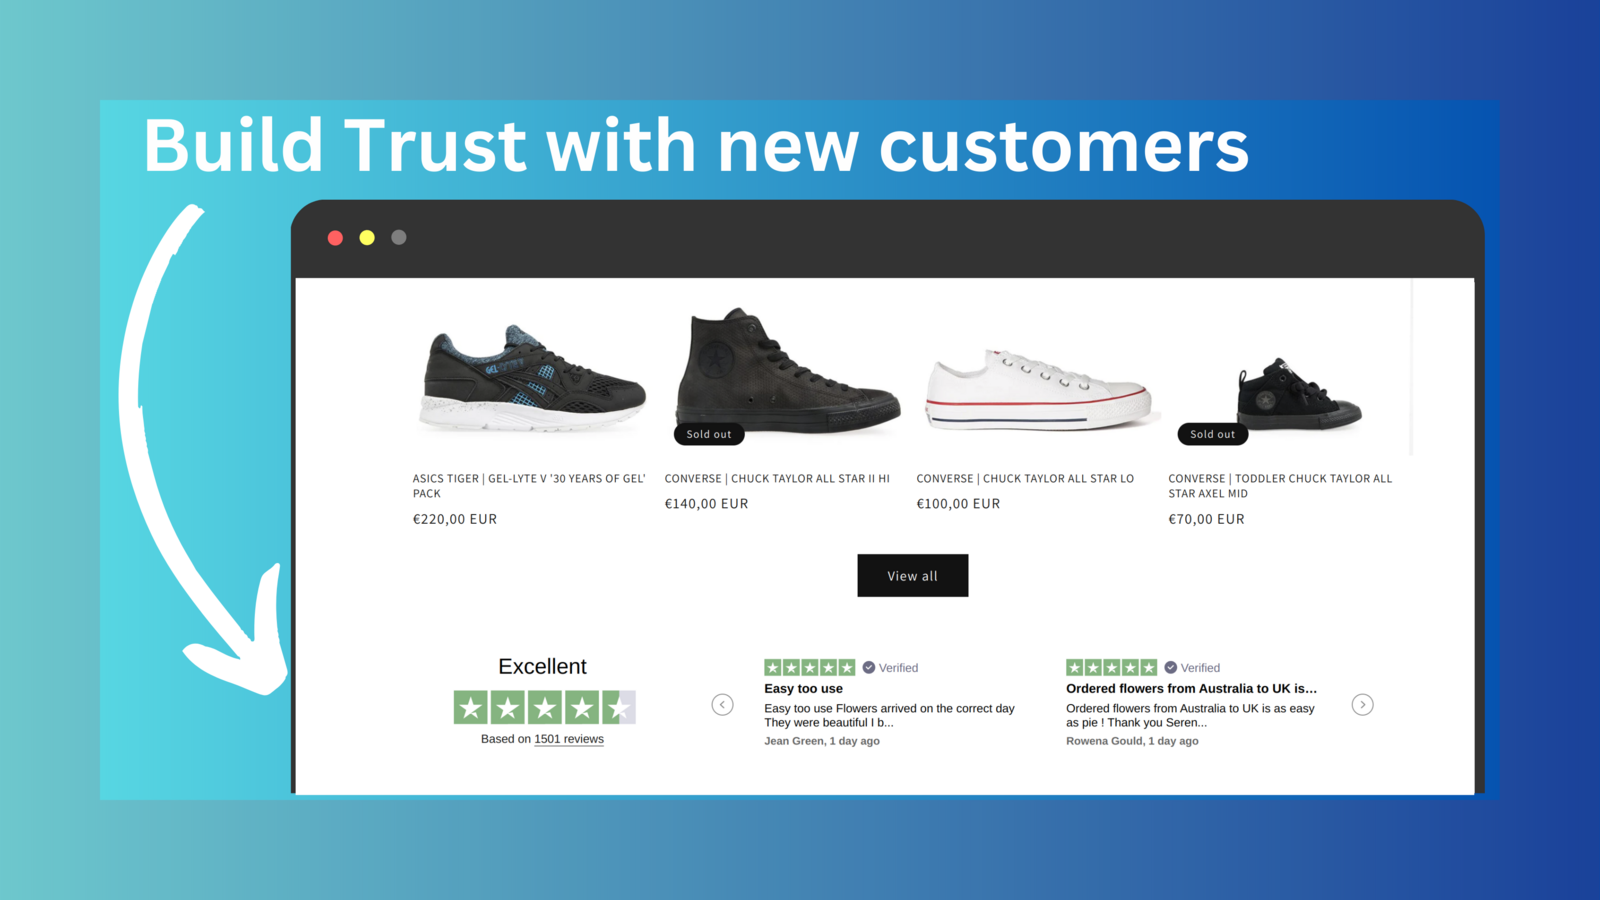 Build Trust with new customers